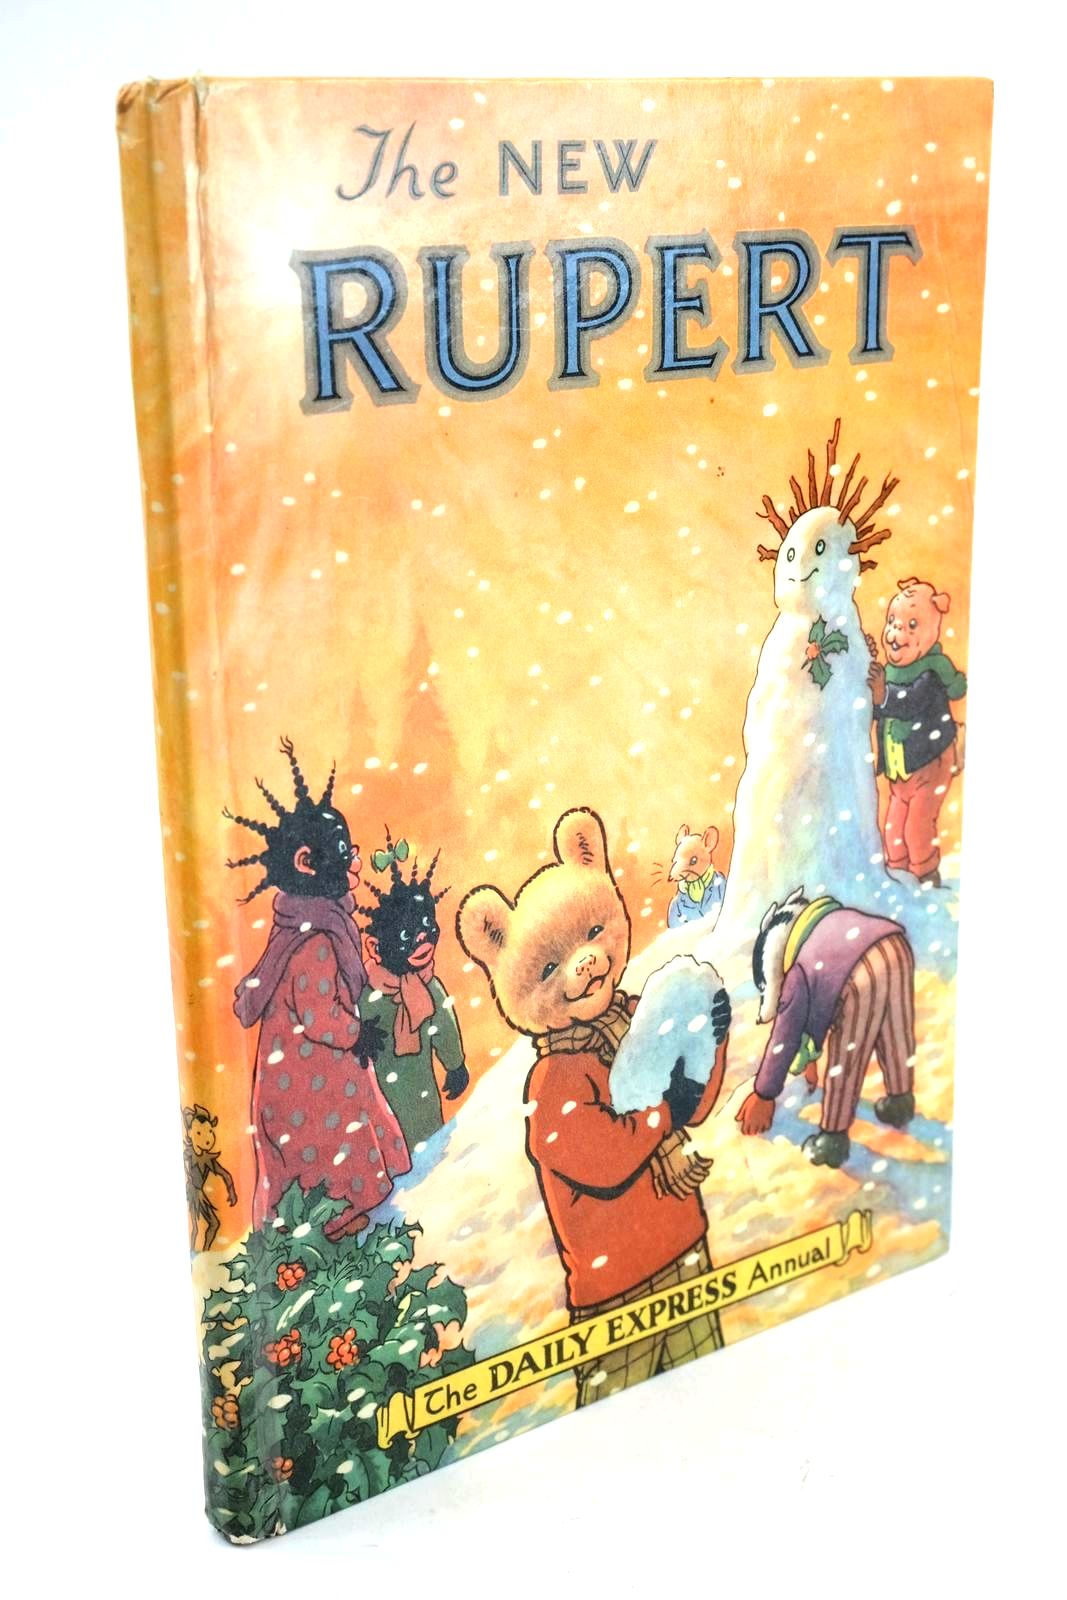 Photo of RUPERT ANNUAL 1954 - THE NEW RUPERT written by Bestall, Alfred illustrated by Bestall, Alfred published by Daily Express (STOCK CODE: 1324347)  for sale by Stella & Rose's Books